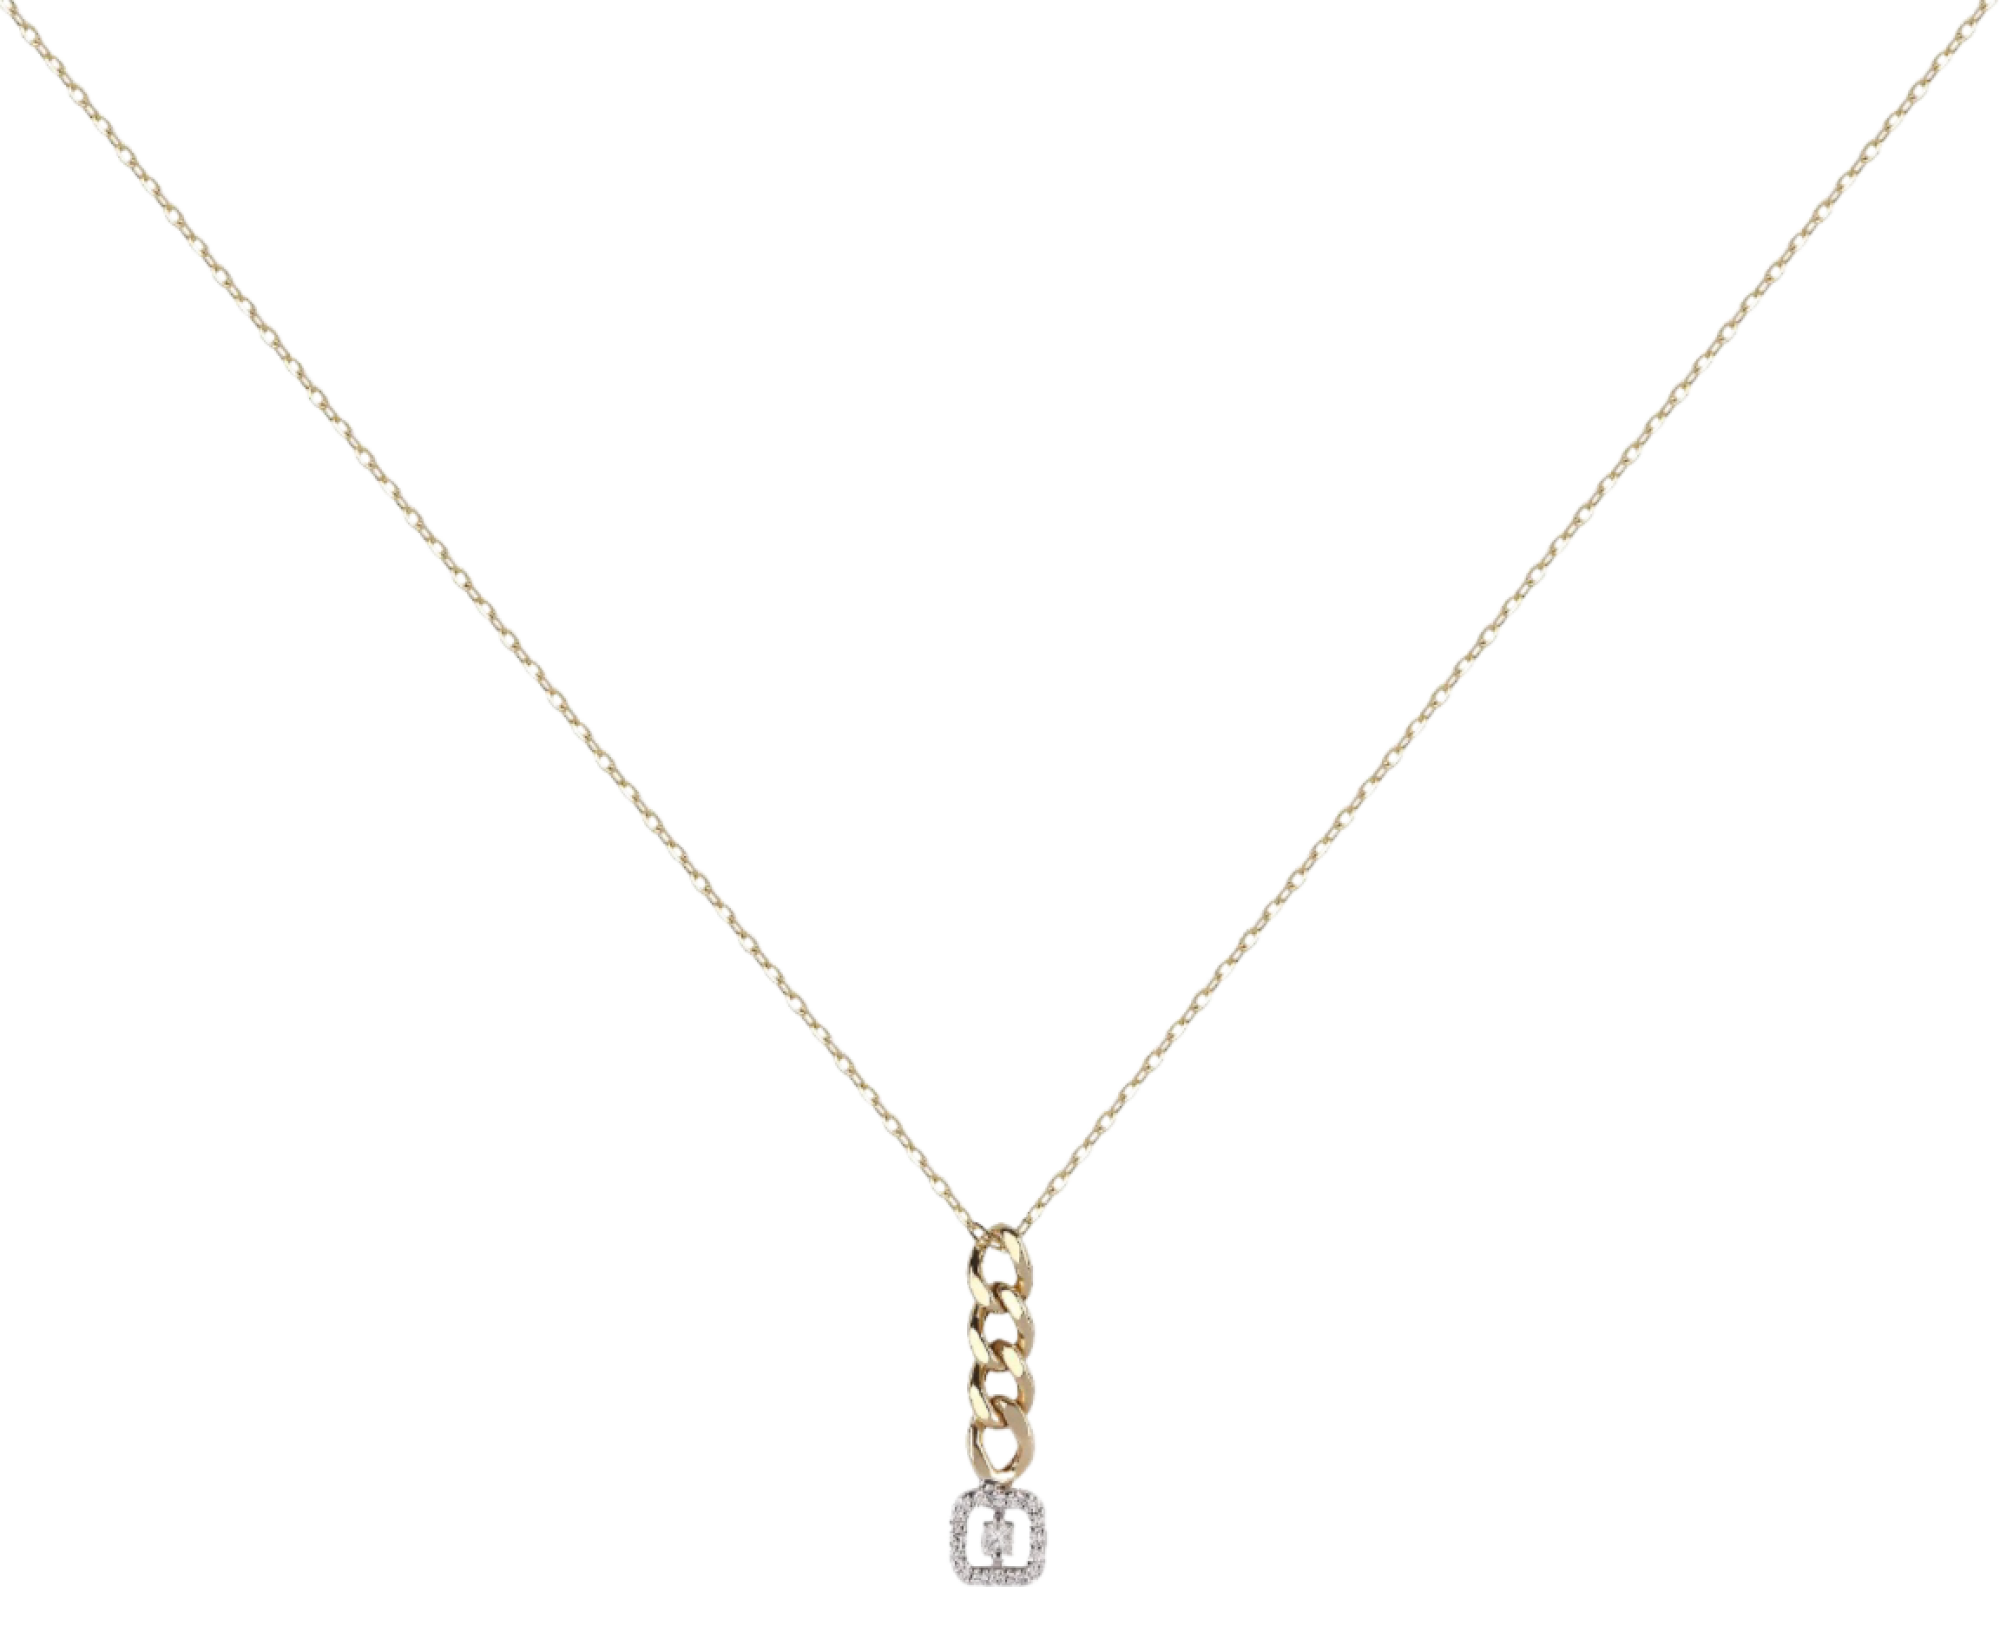 Cuban link diamond pendant necklace in gold by Yessayan